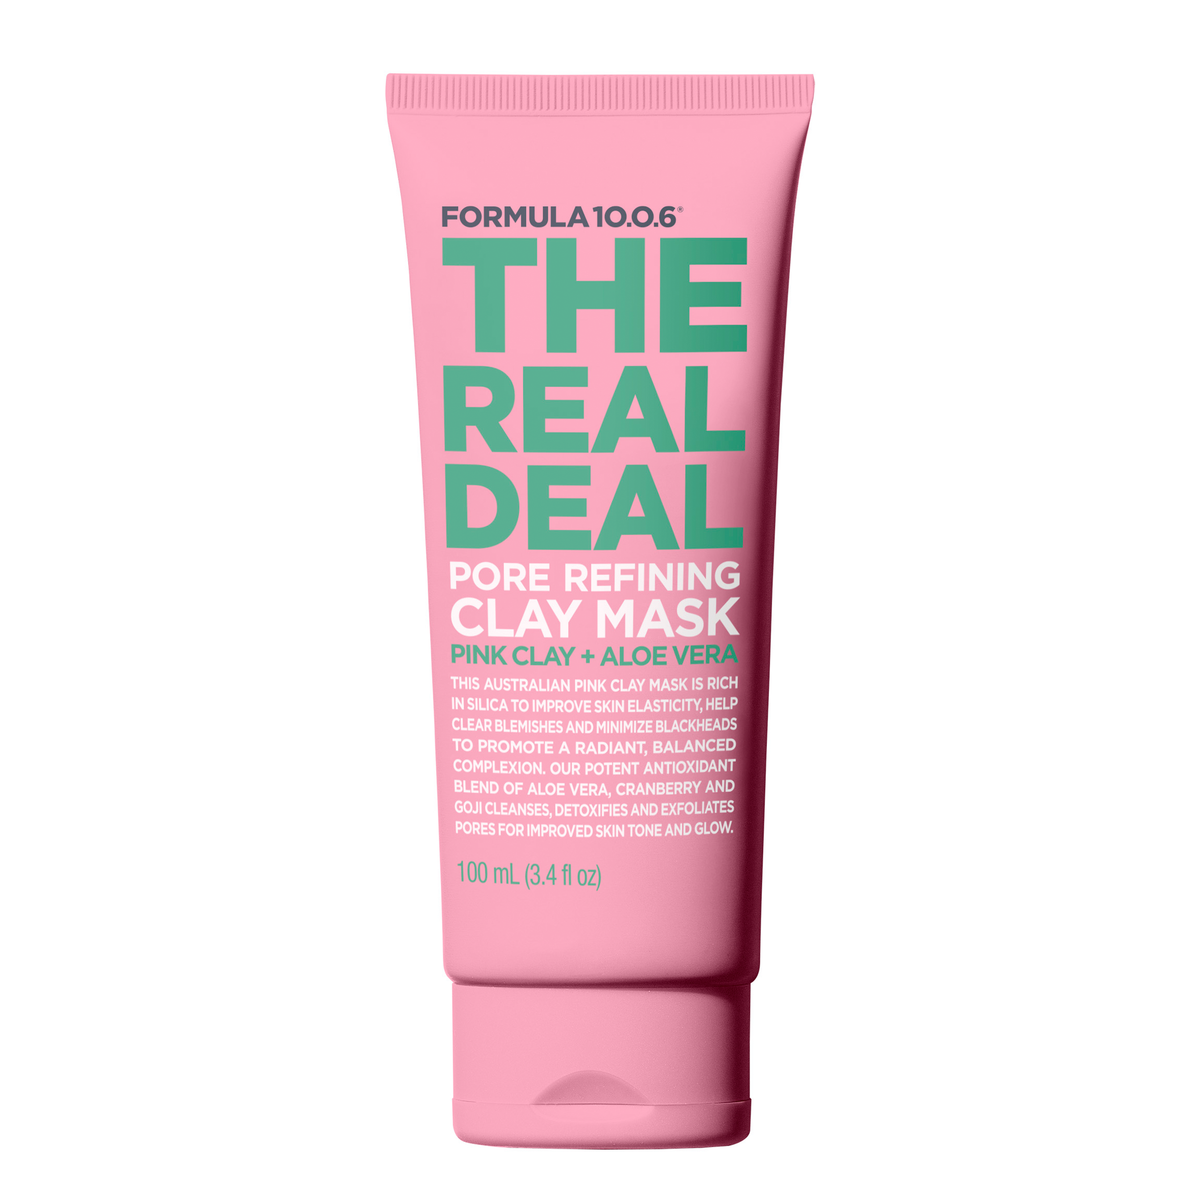 The Real Deal Pore Refining Pink Clay Mask